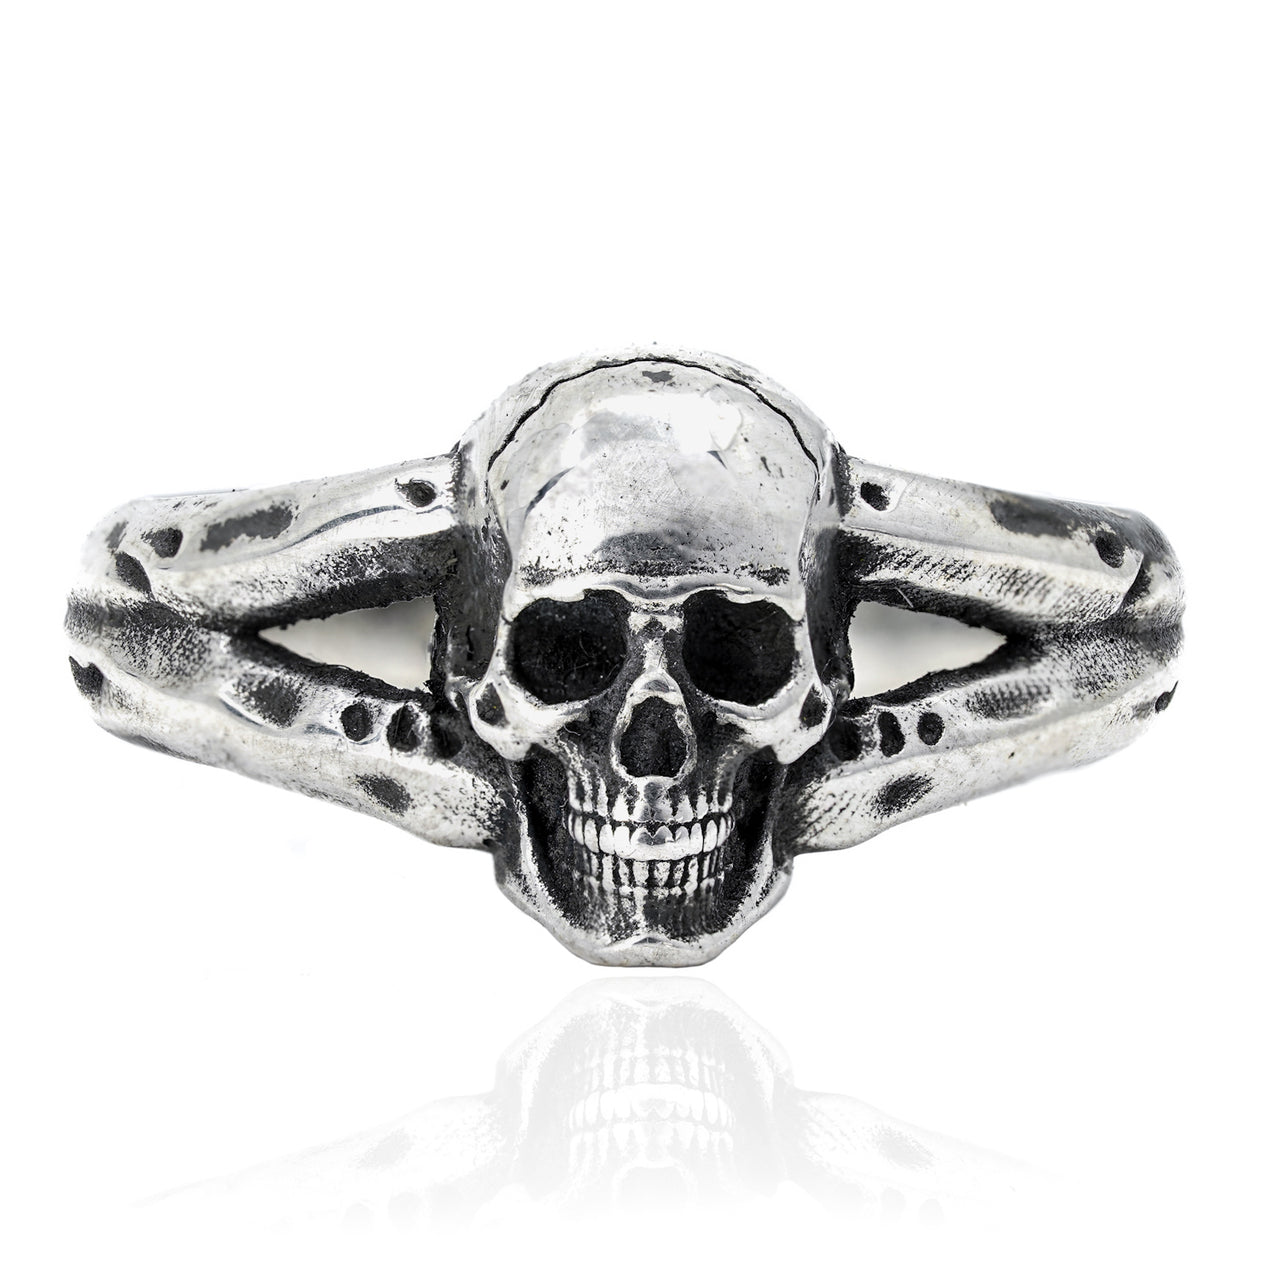 Small Skull Ring - Sterling Silver - Black Feather Design